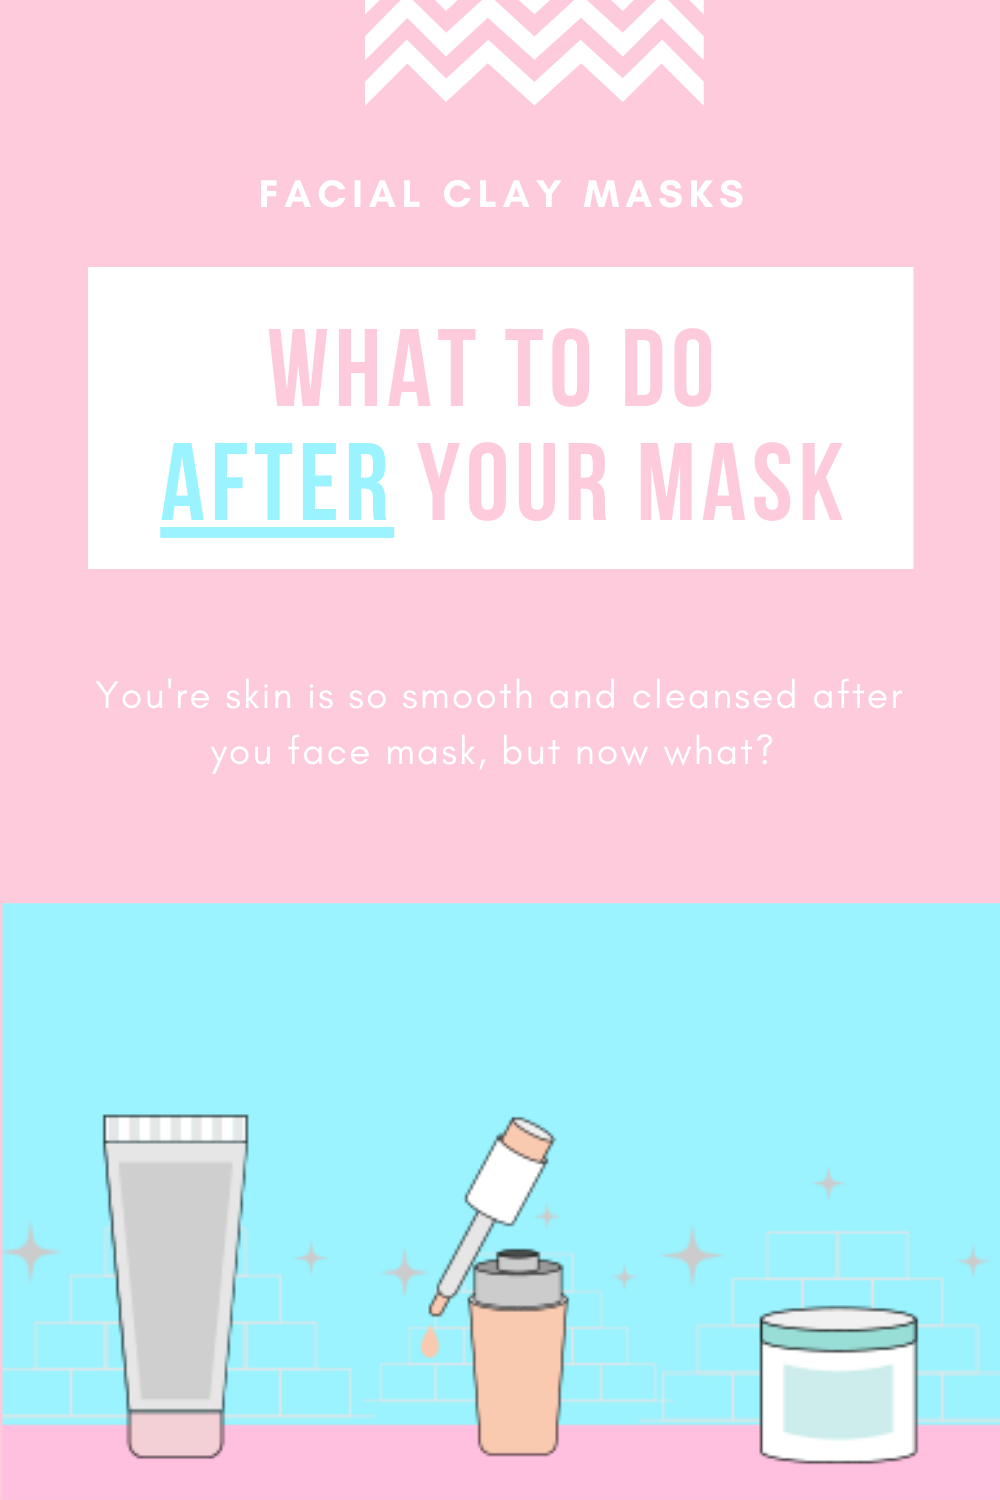 What should I do after my face mask? 2